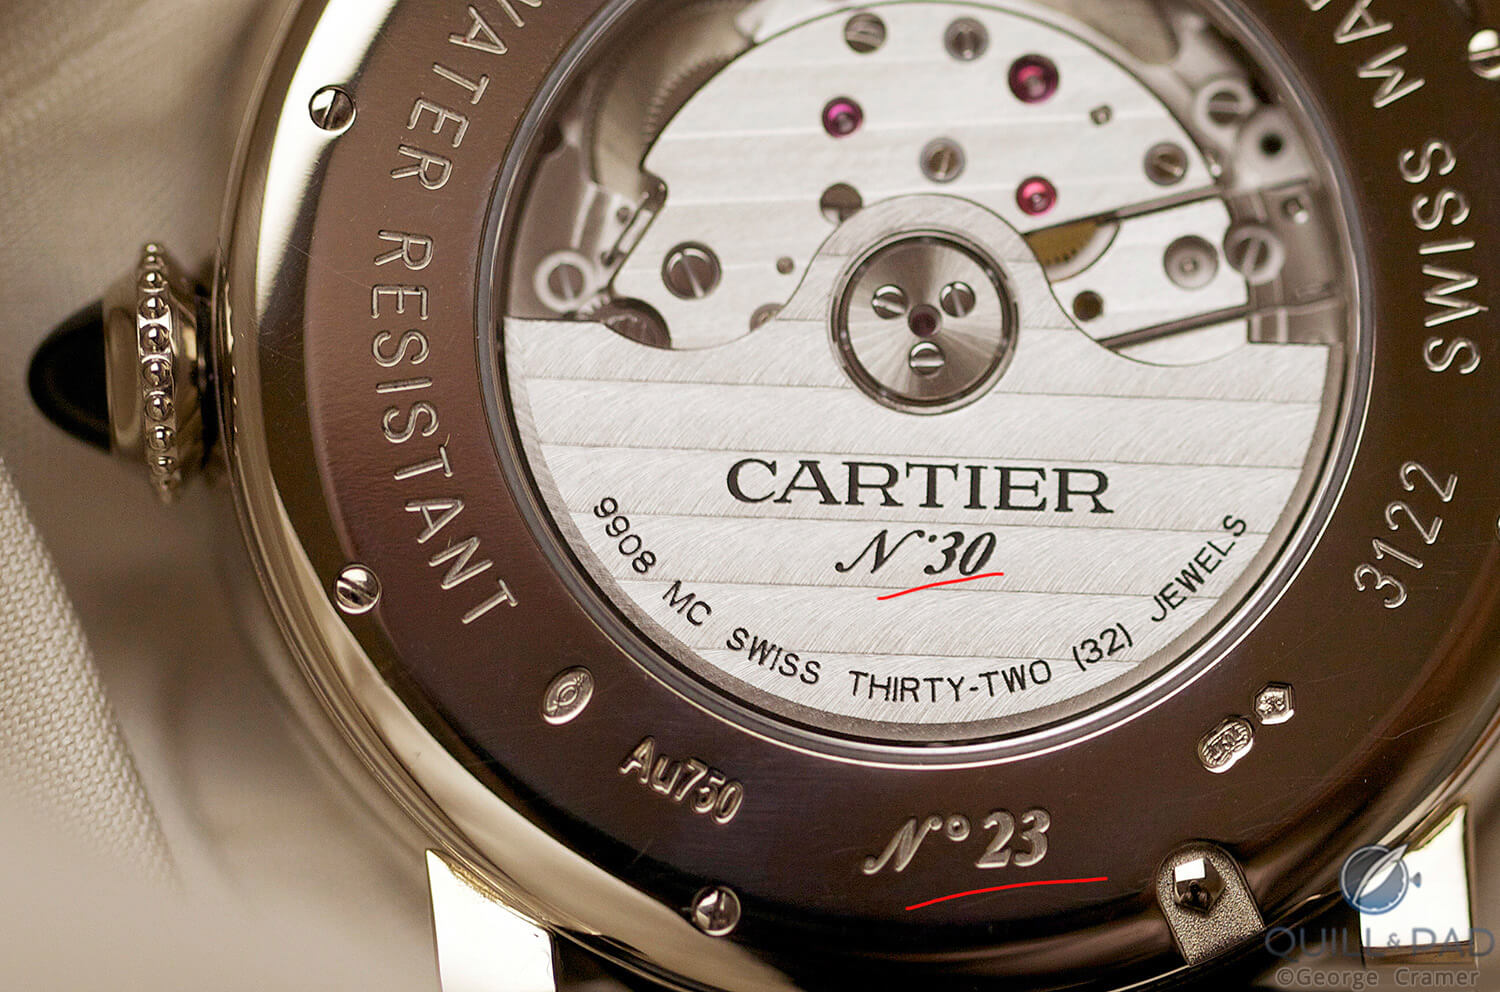 A Double numbered watch from the Cartier Fine Watch Making collection with one number on the movement and another on the case